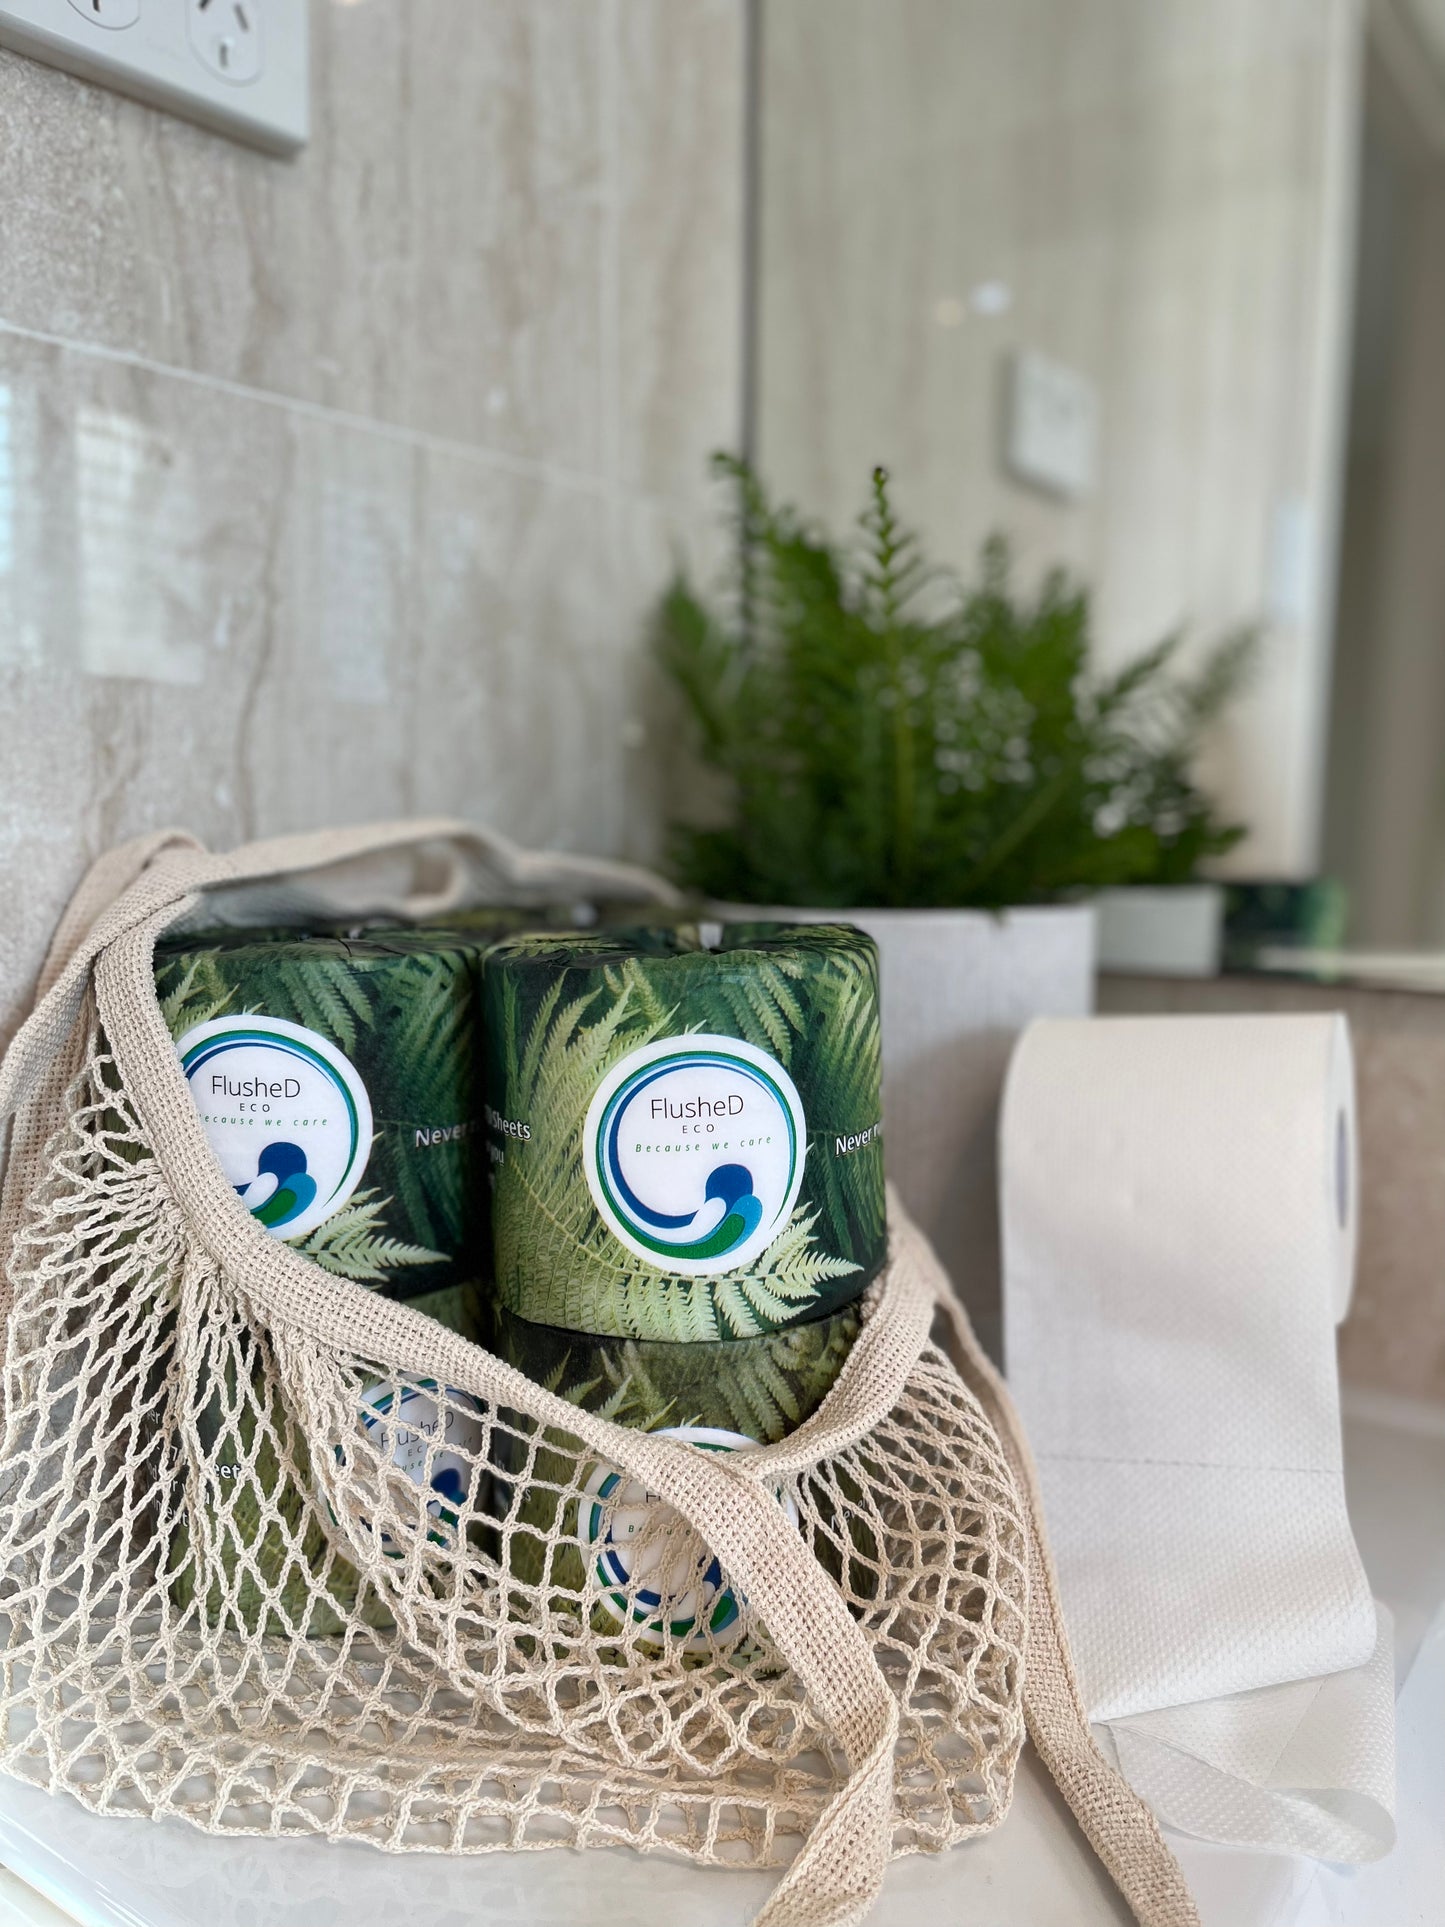 Toilet Paper Subscription Service | 100% Bamboo | FlusheD ECO